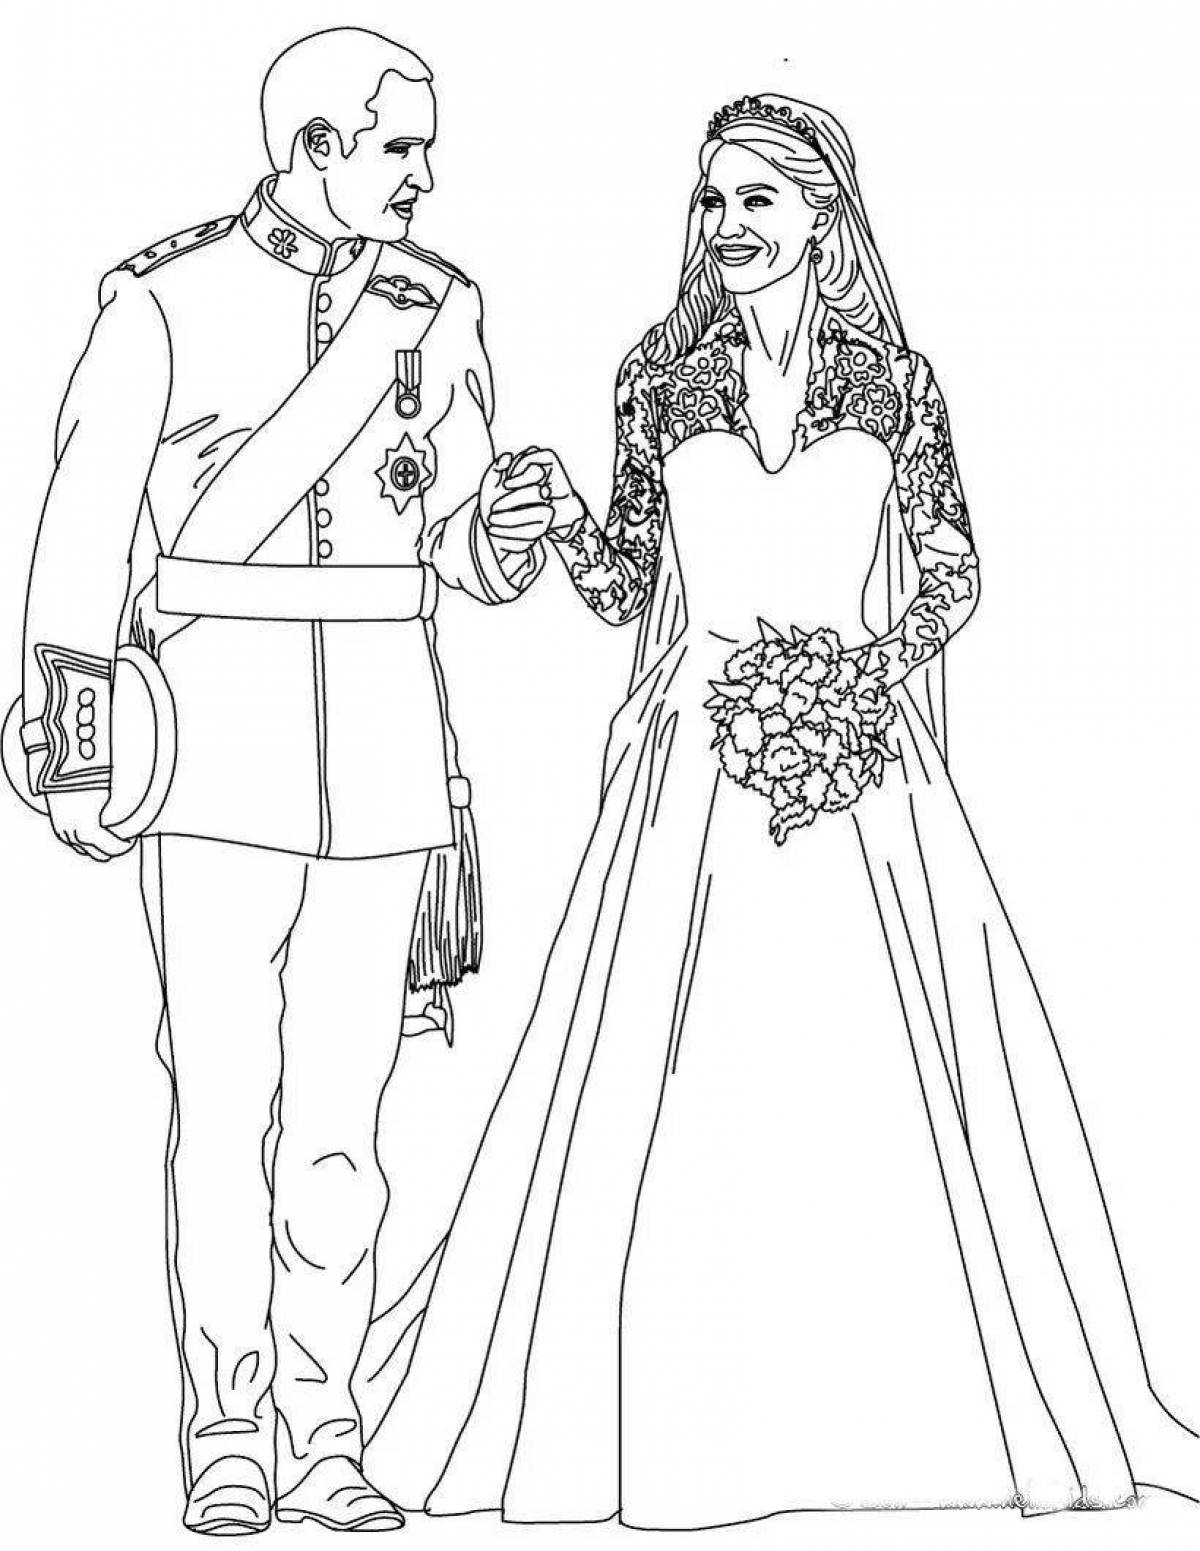 Ornate wedding coloring book for kids